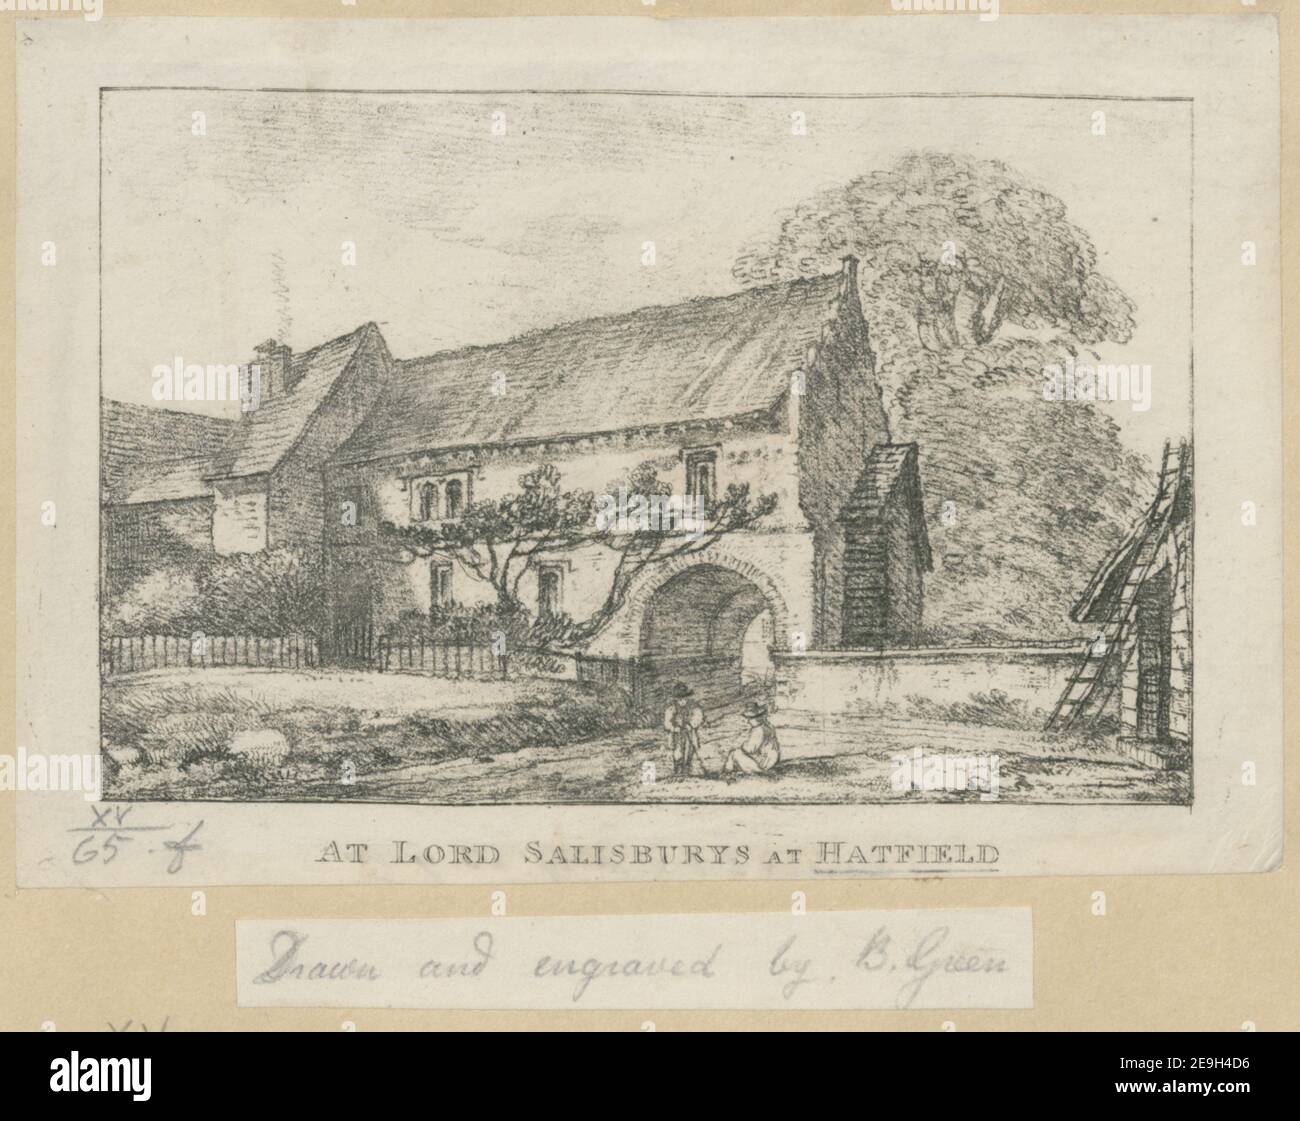 At Lord Salisburys at Hatfield. Author  Green, Benjamin 15.65.f. Place of publication: [London] Publisher: [unidentified publisher]., Date of publication: [1780 c.]  Item type: 1 print Medium: softground etching Dimensions: sheet 11.3 x 16.7 cm [trimmed within platemark]  Former owner: George III, King of Great Britain, 1738-1820 Stock Photo